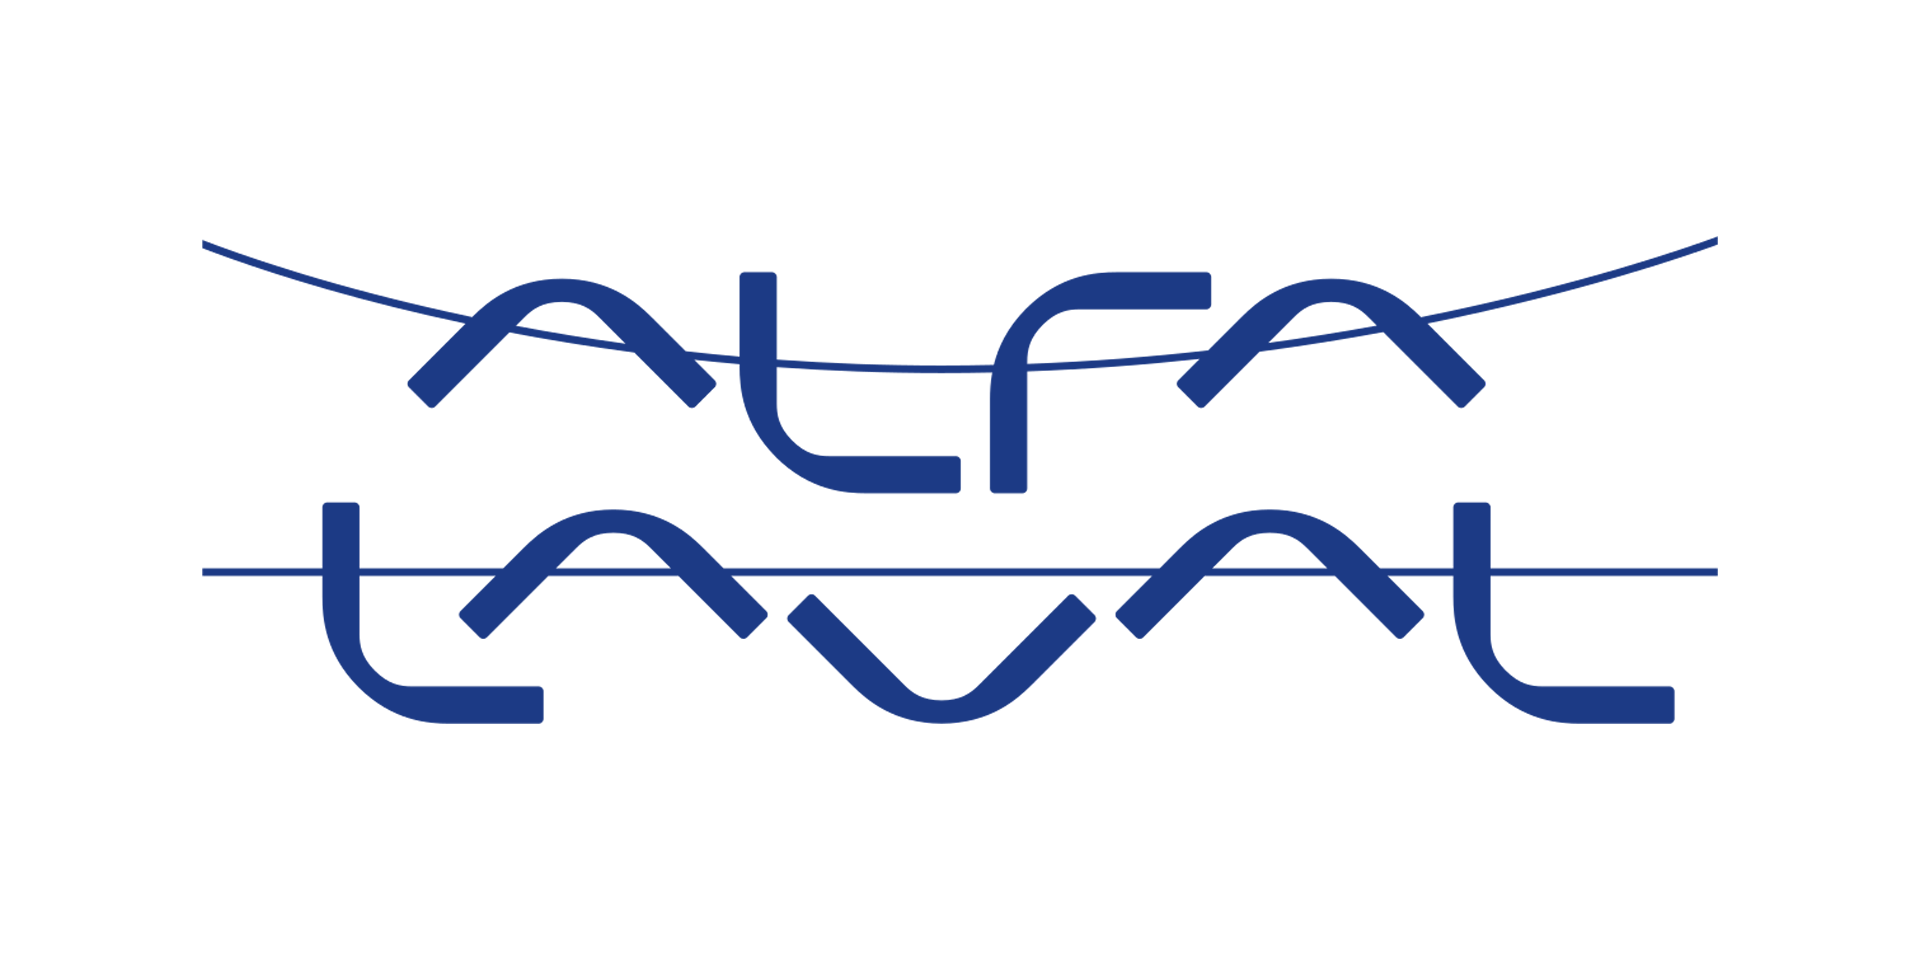 Kyoto & Alfa Laval sign letter of intent